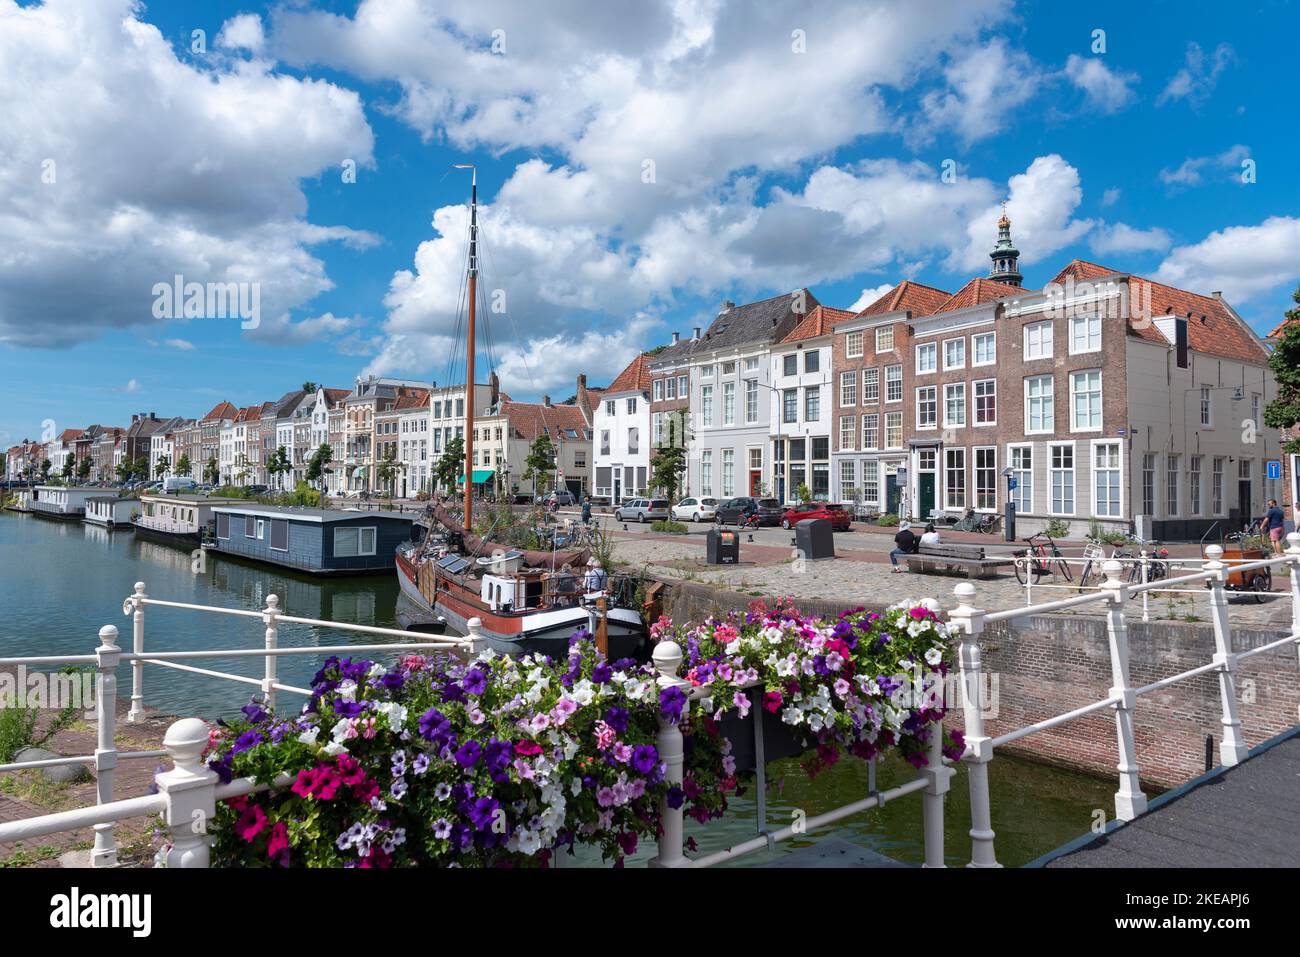 Cityscape with houseboat and traditional flat-bottomed sailing boat on Bierkaai, Middelburg, Zeeland, Netherlands, Europe Stock Photo